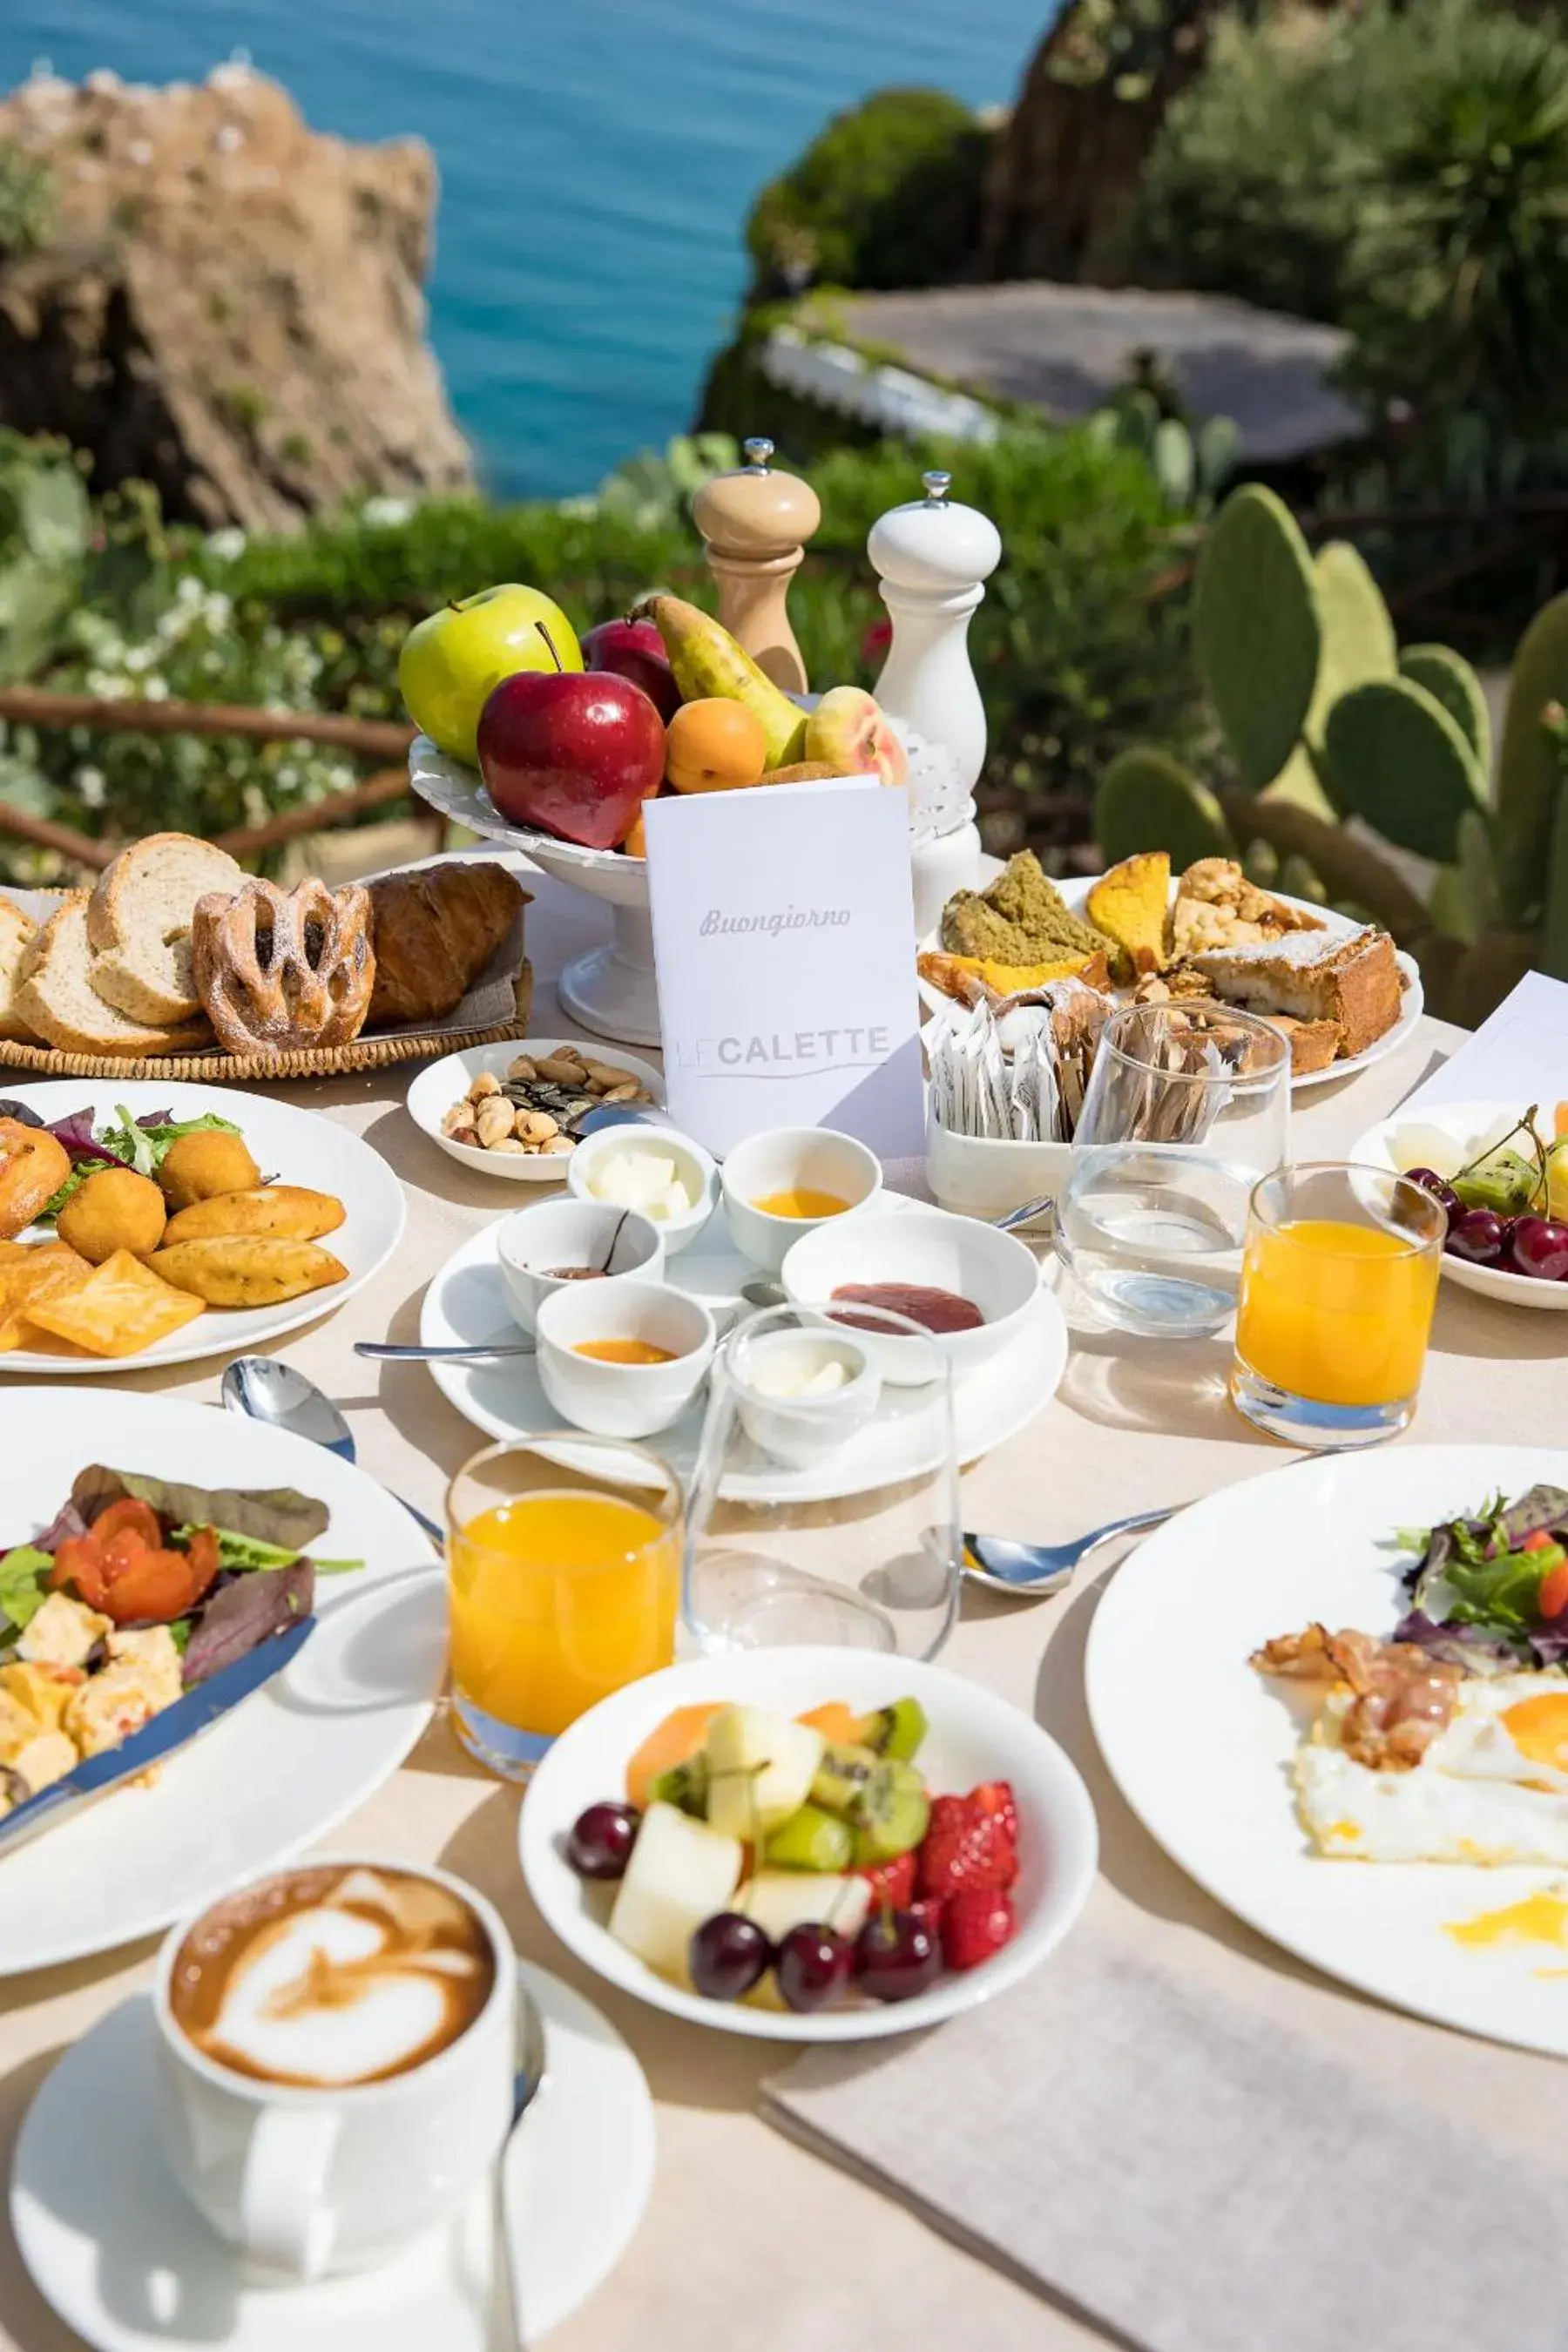 Restaurant/places to eat, Breakfast in Le Calette Garden & Bay